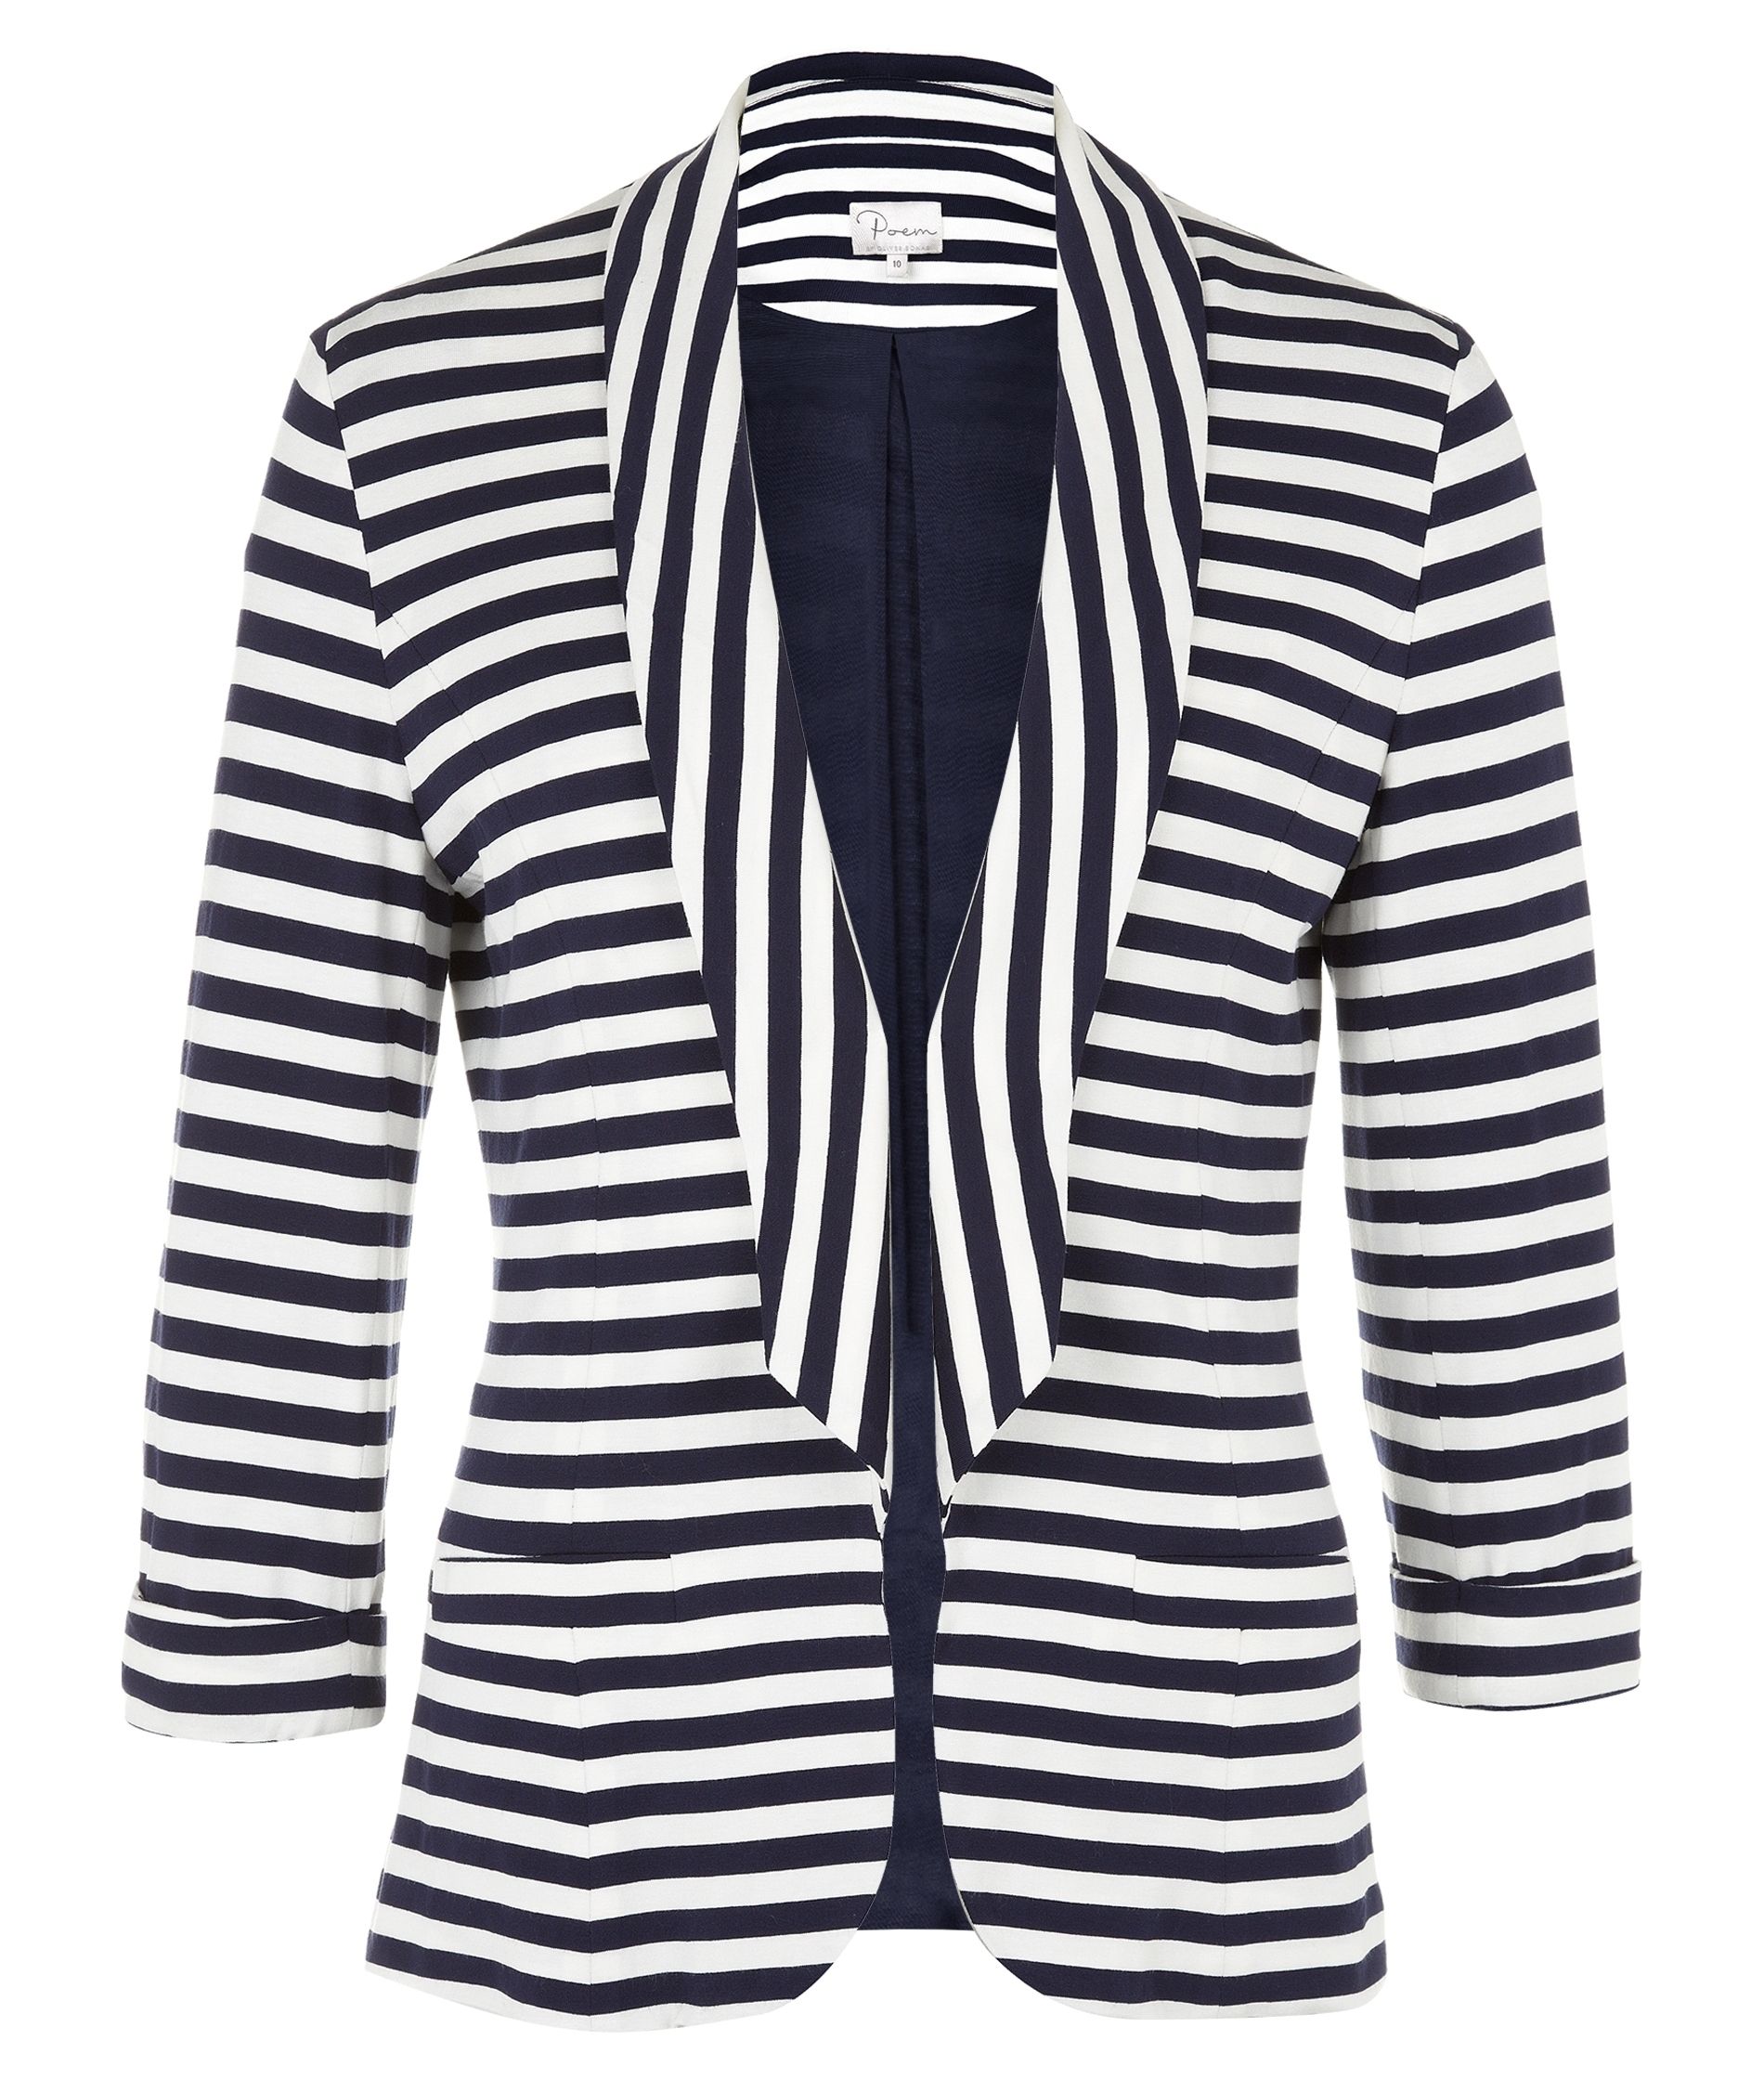 Relaxed Stripe Jersey Jacket by Poem | Oliver Bonas